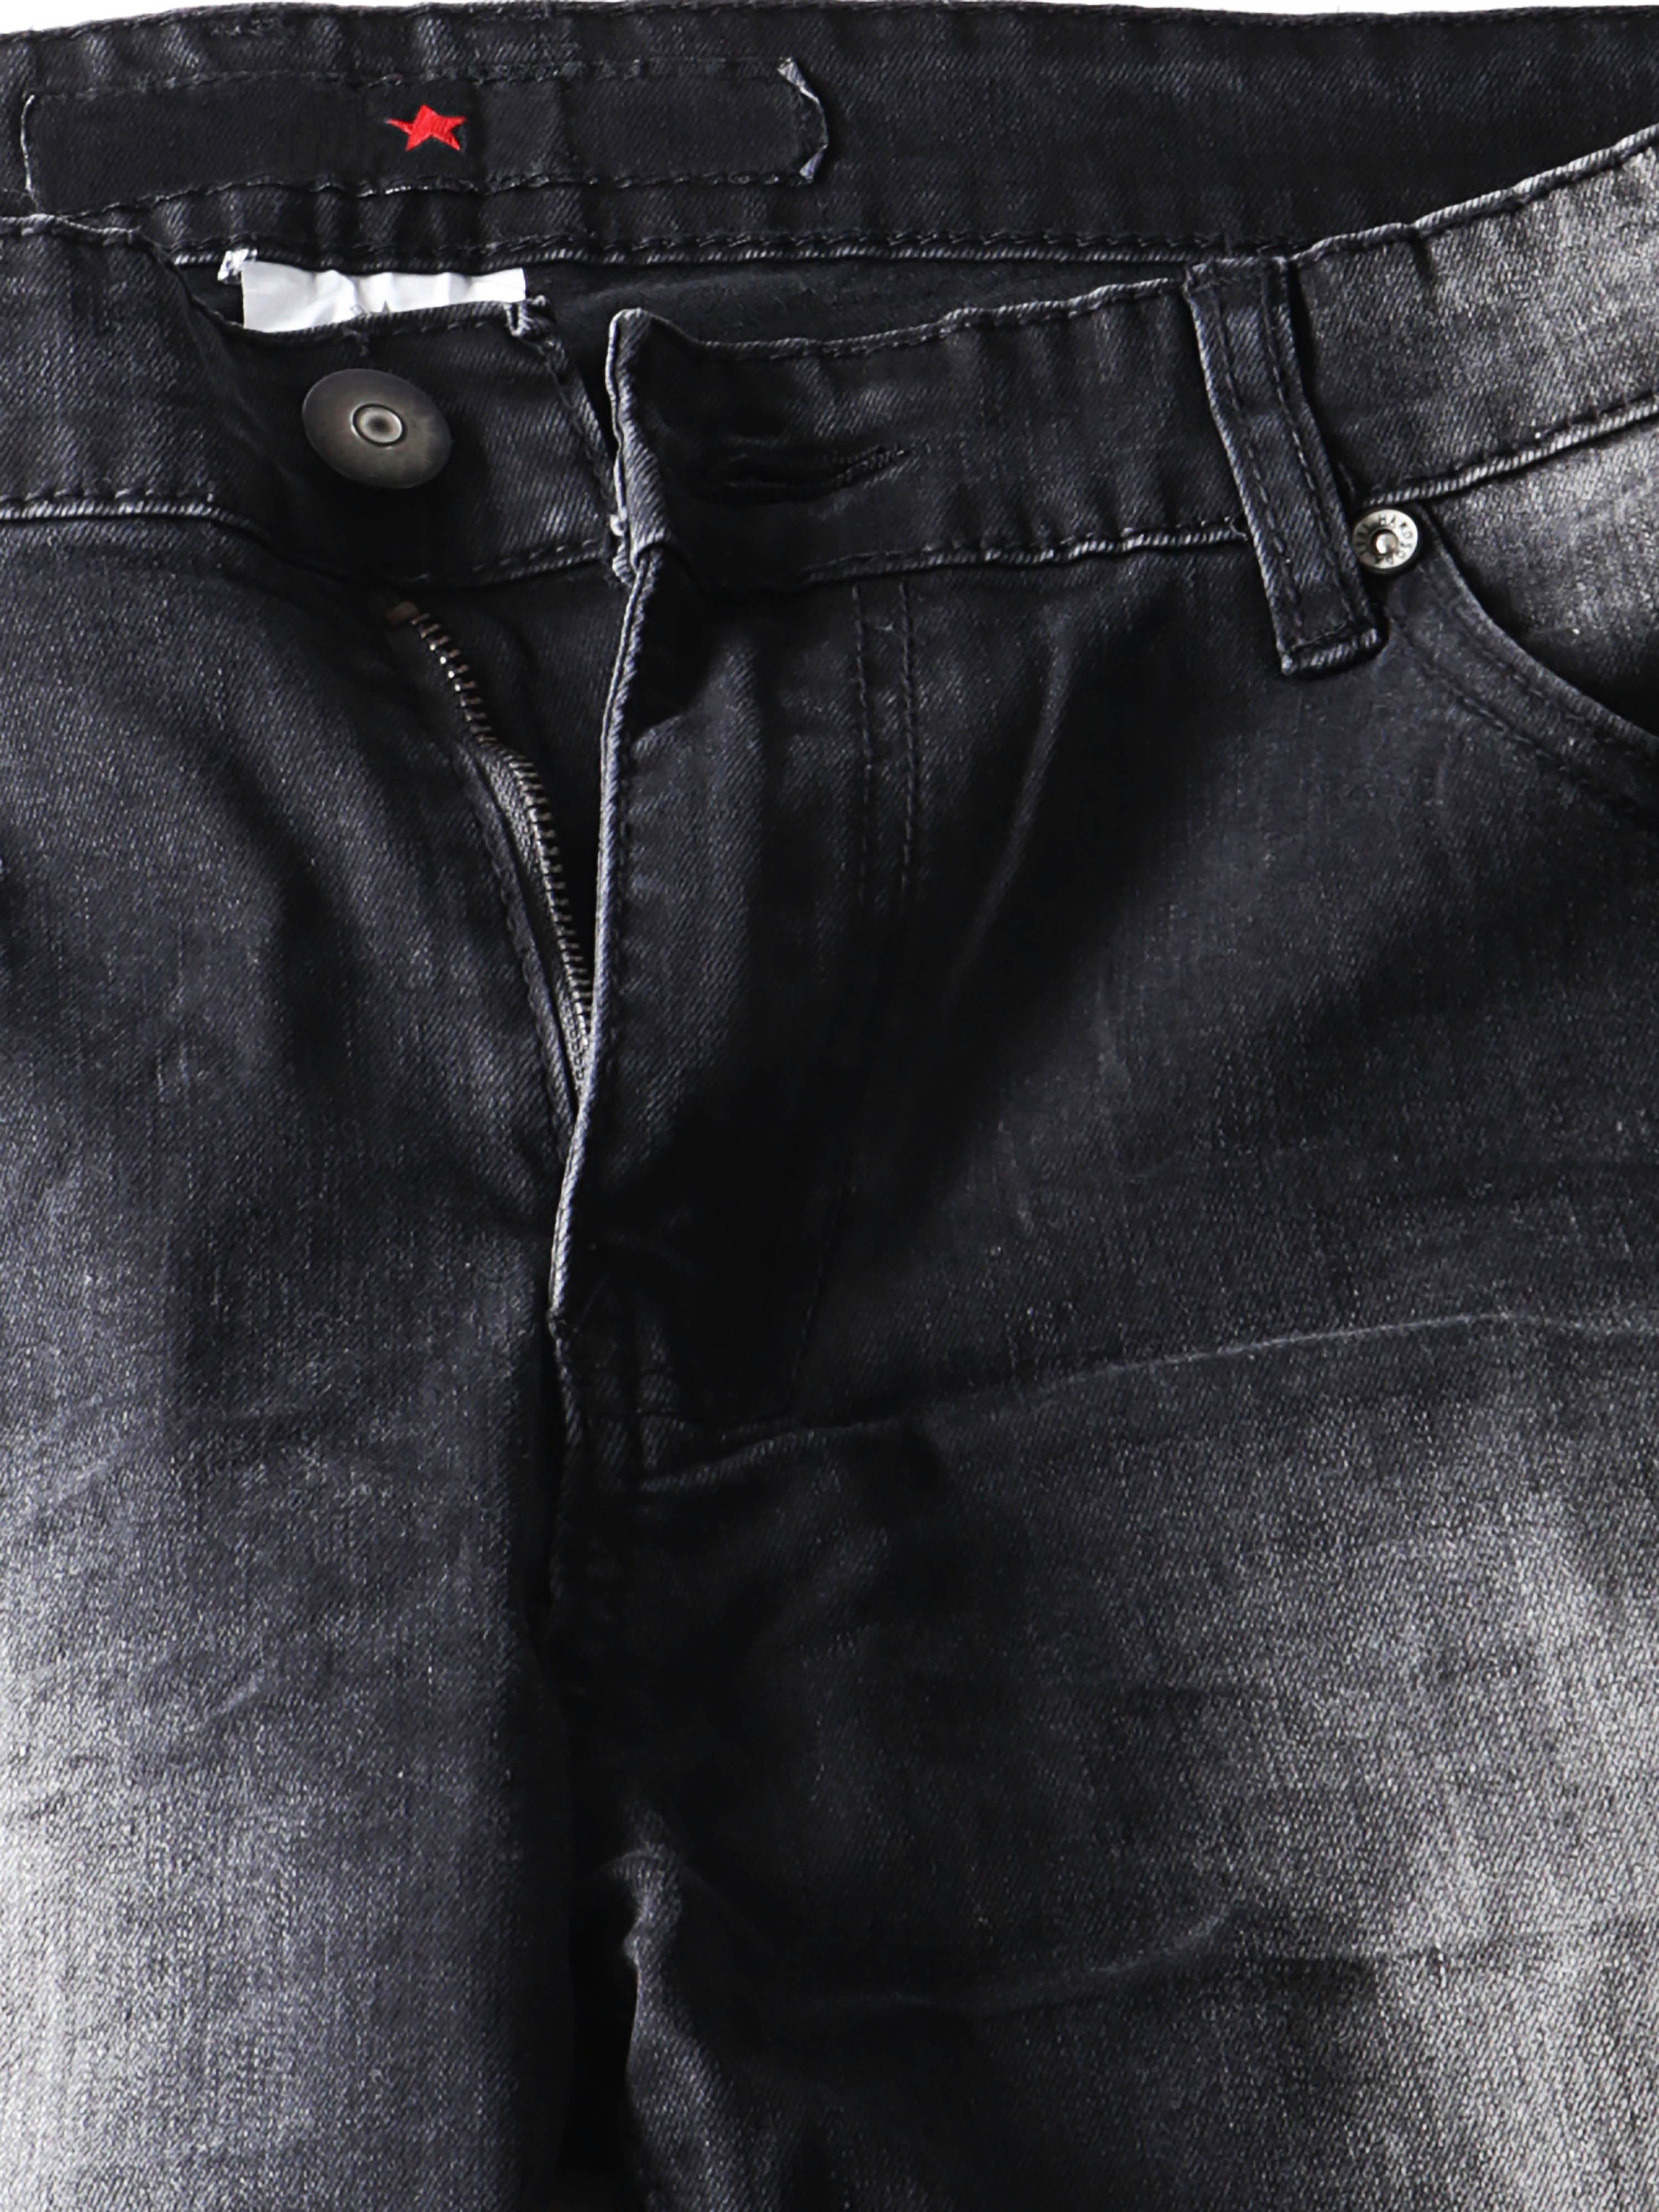 Ma Croix Mens Distressed Skinny Fit Denim Jeans with Zipper Pocket - image 3 of 6